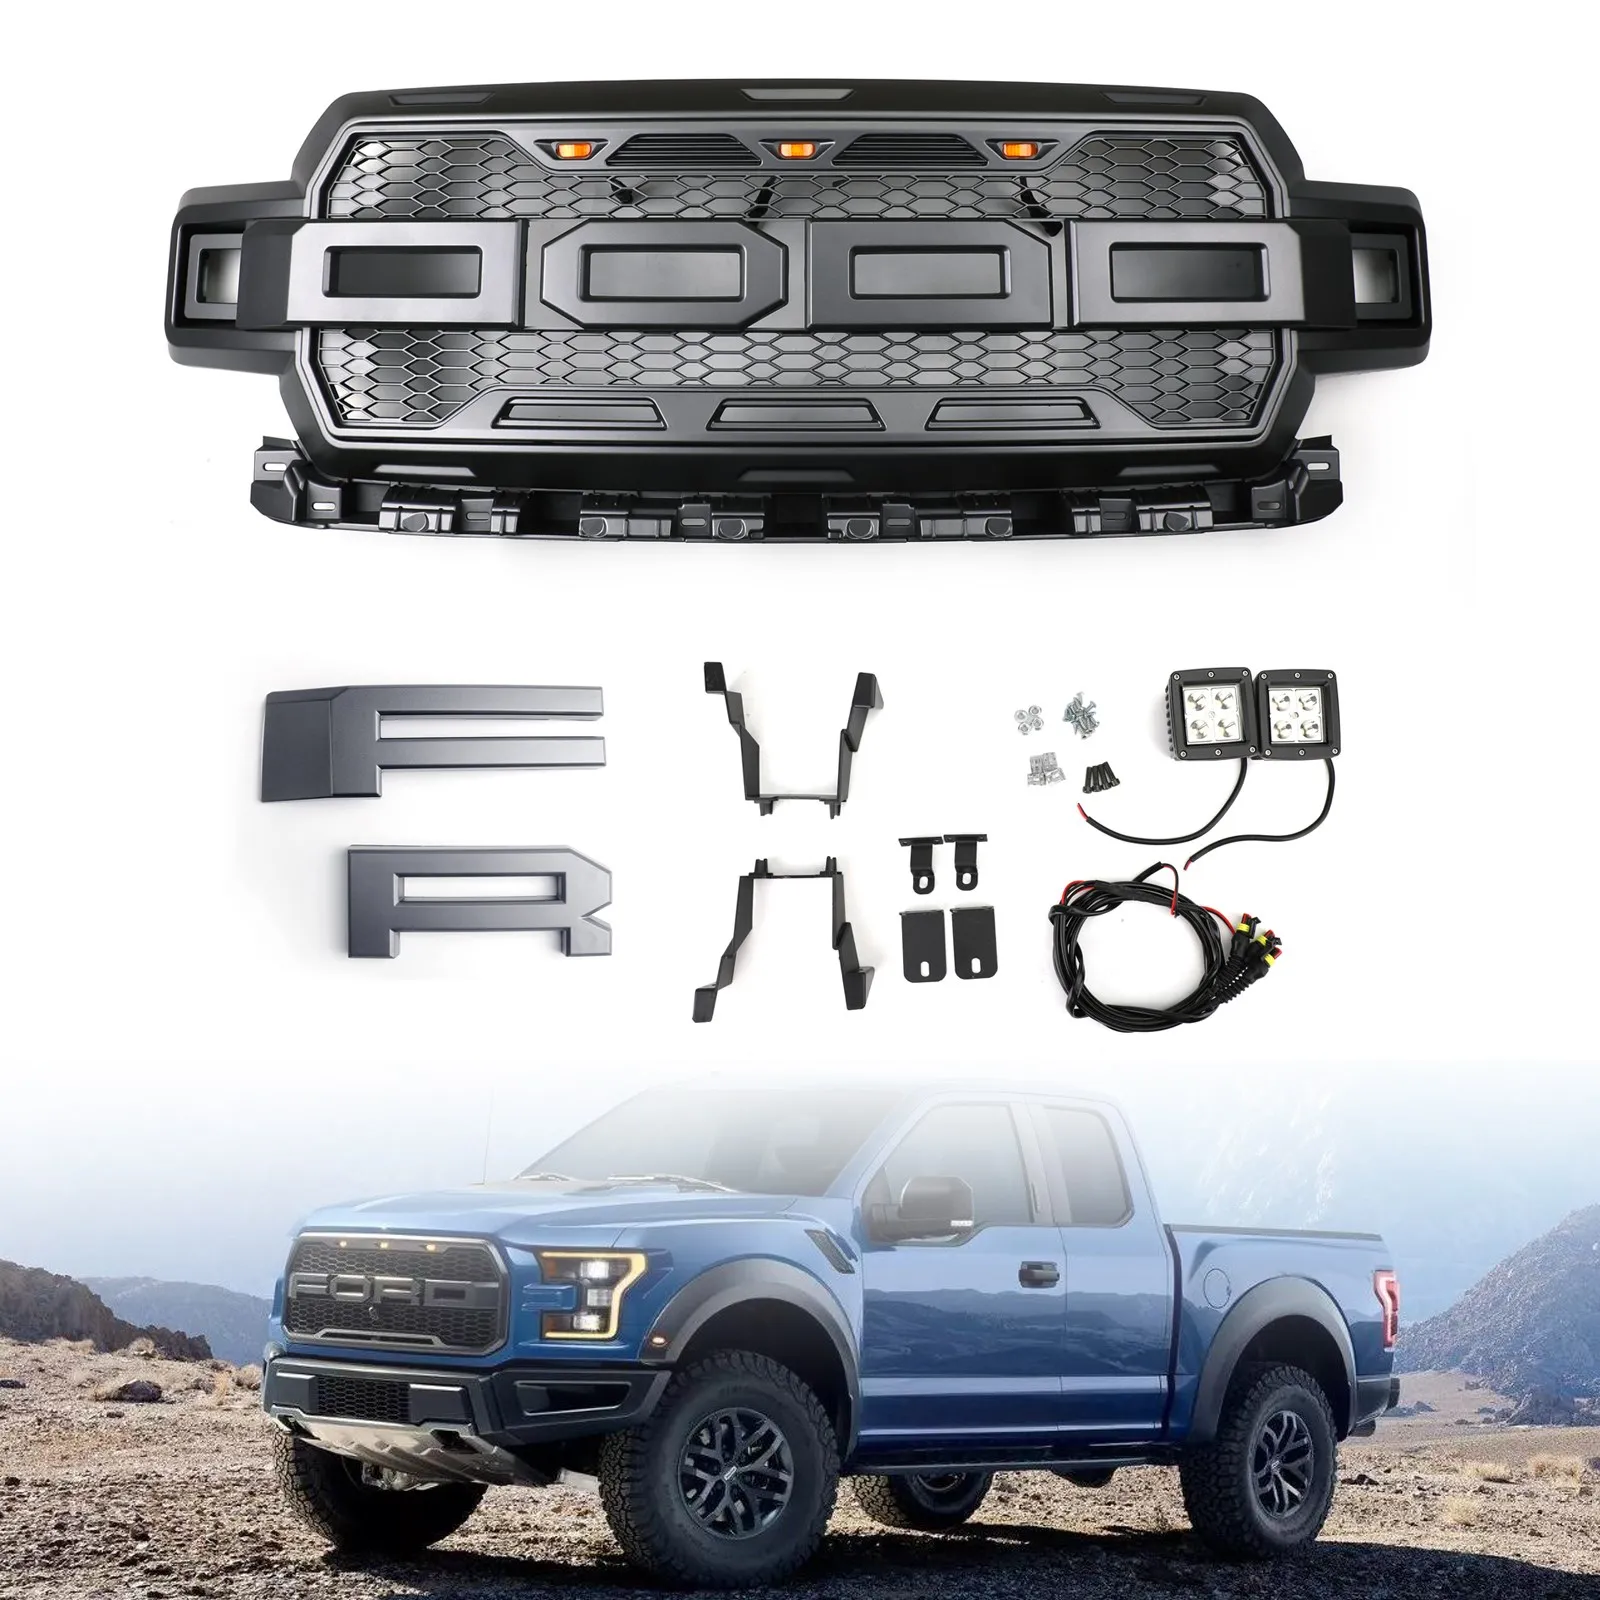 

Areyourshop Honeycomb Grill Amber LED Raptor Style Grill Grille For Ford F150 F-150 2018 2019 2020 With Logo